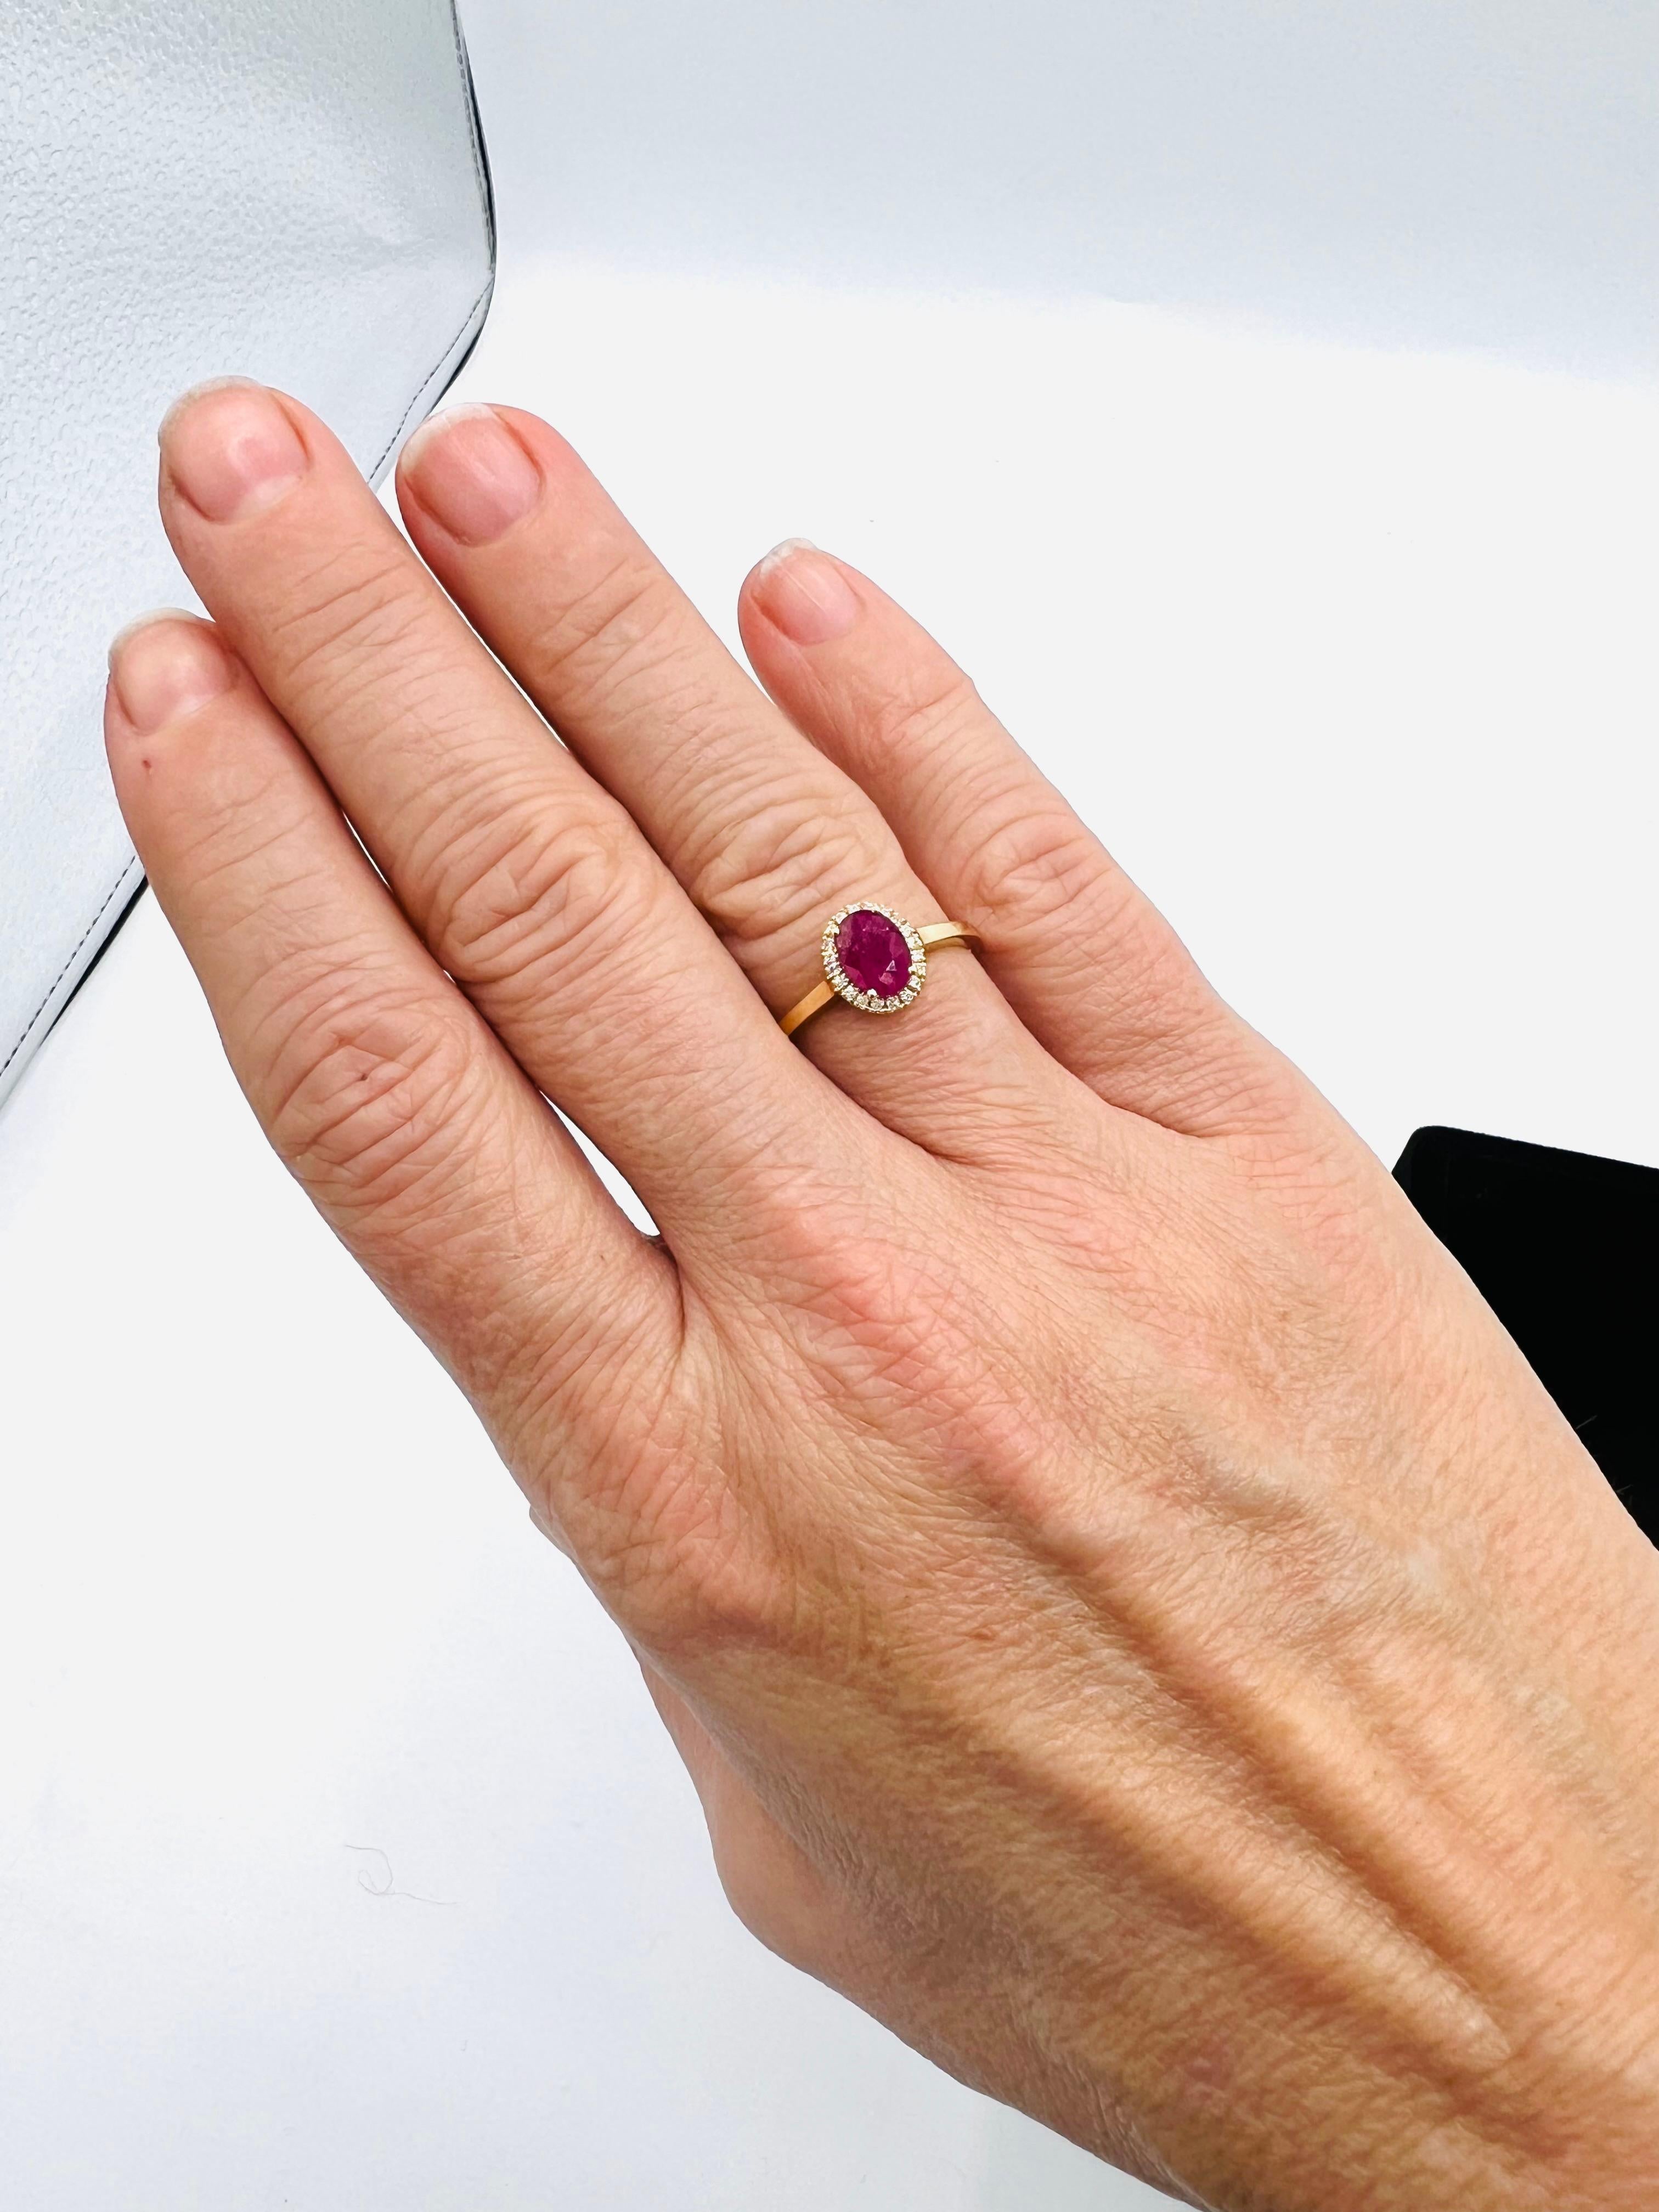 engagement ring set with an oval faceted ruby stone, measuring (7mm by 5mm), surrounded by a pavé of brilliants,
very pretty engagement ring, refined, set in its center with a ruby of approximately 1 carat surrounded by a pavé of brilliants for 0.20